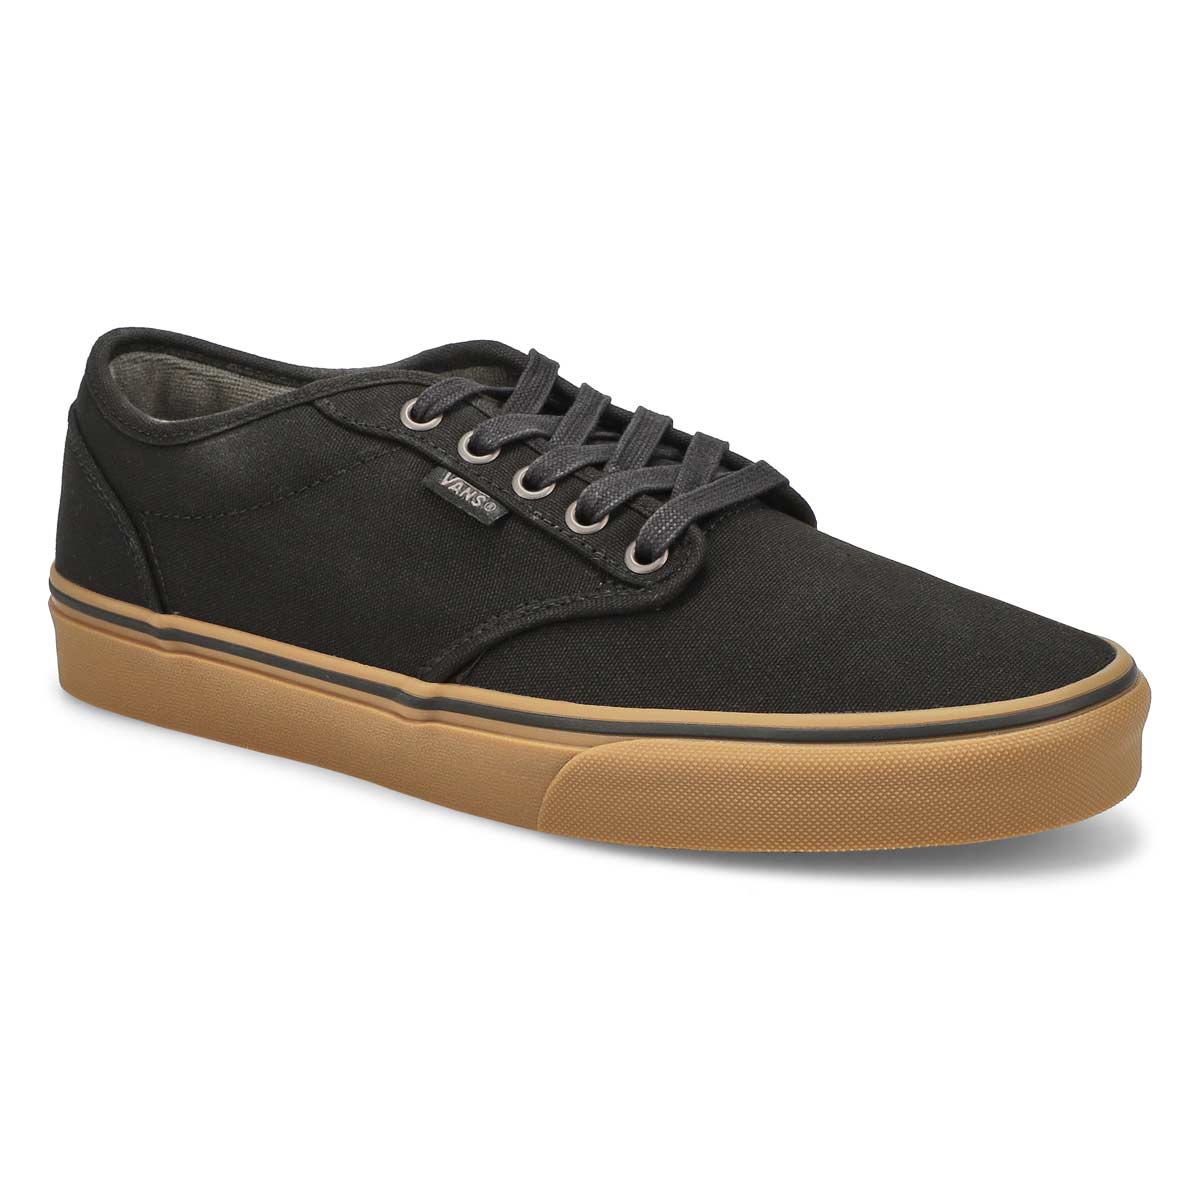 ATWOOD black/gum lace up sneaker 